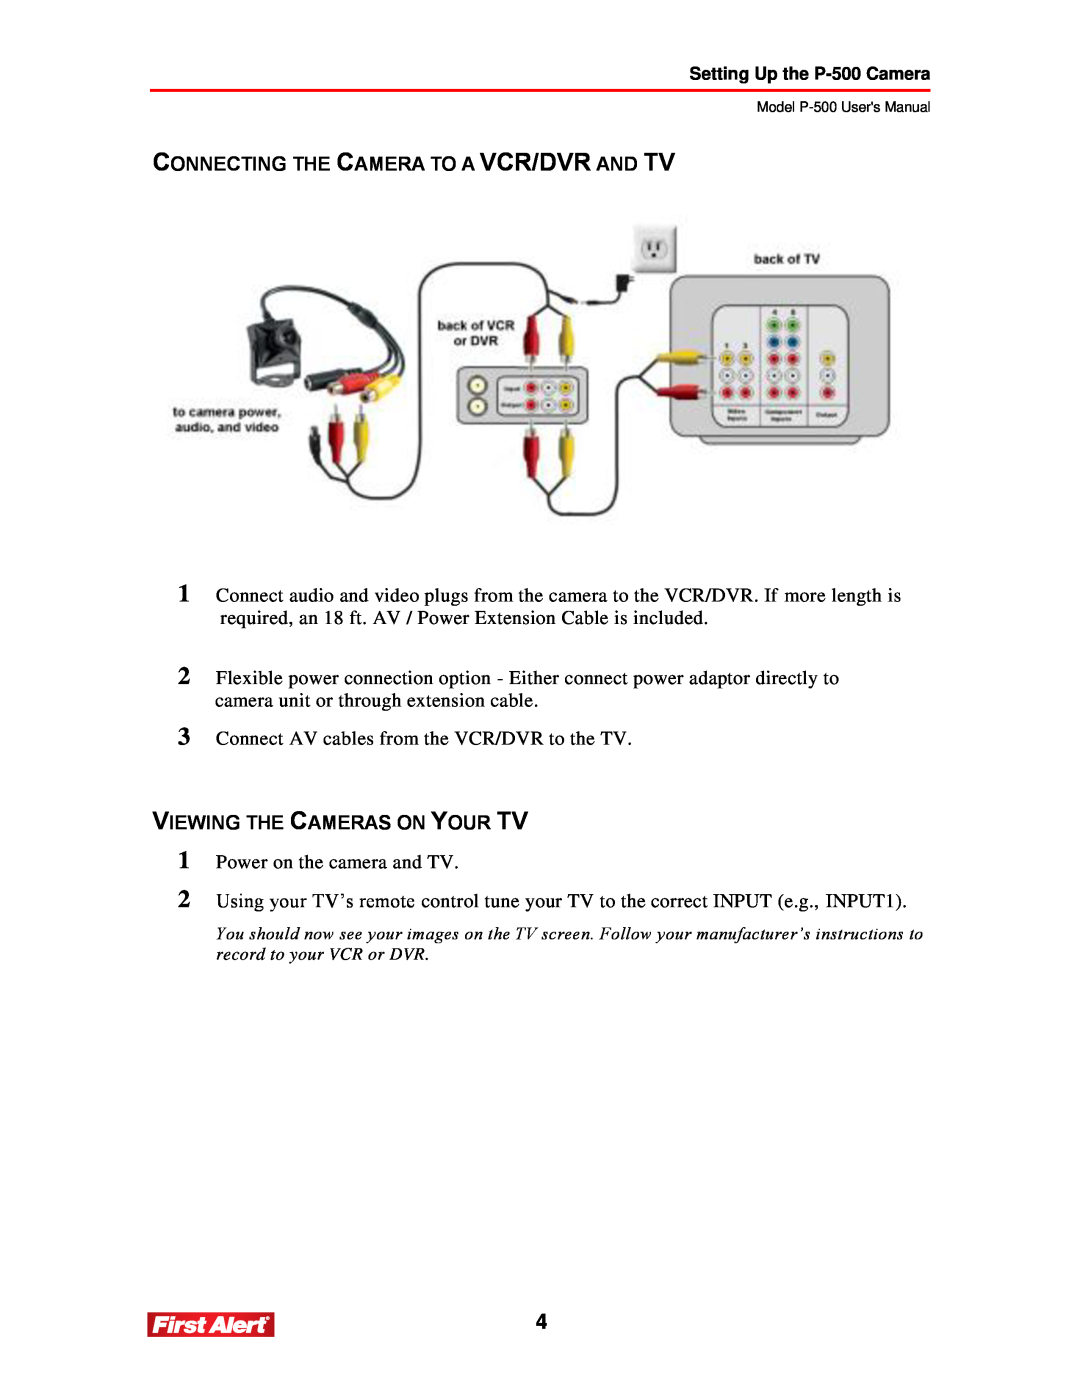 First Alert P-500 user manual Connecting The Camera To A Vcr/Dvr And Tv, Viewing The Cameras On Your Tv 